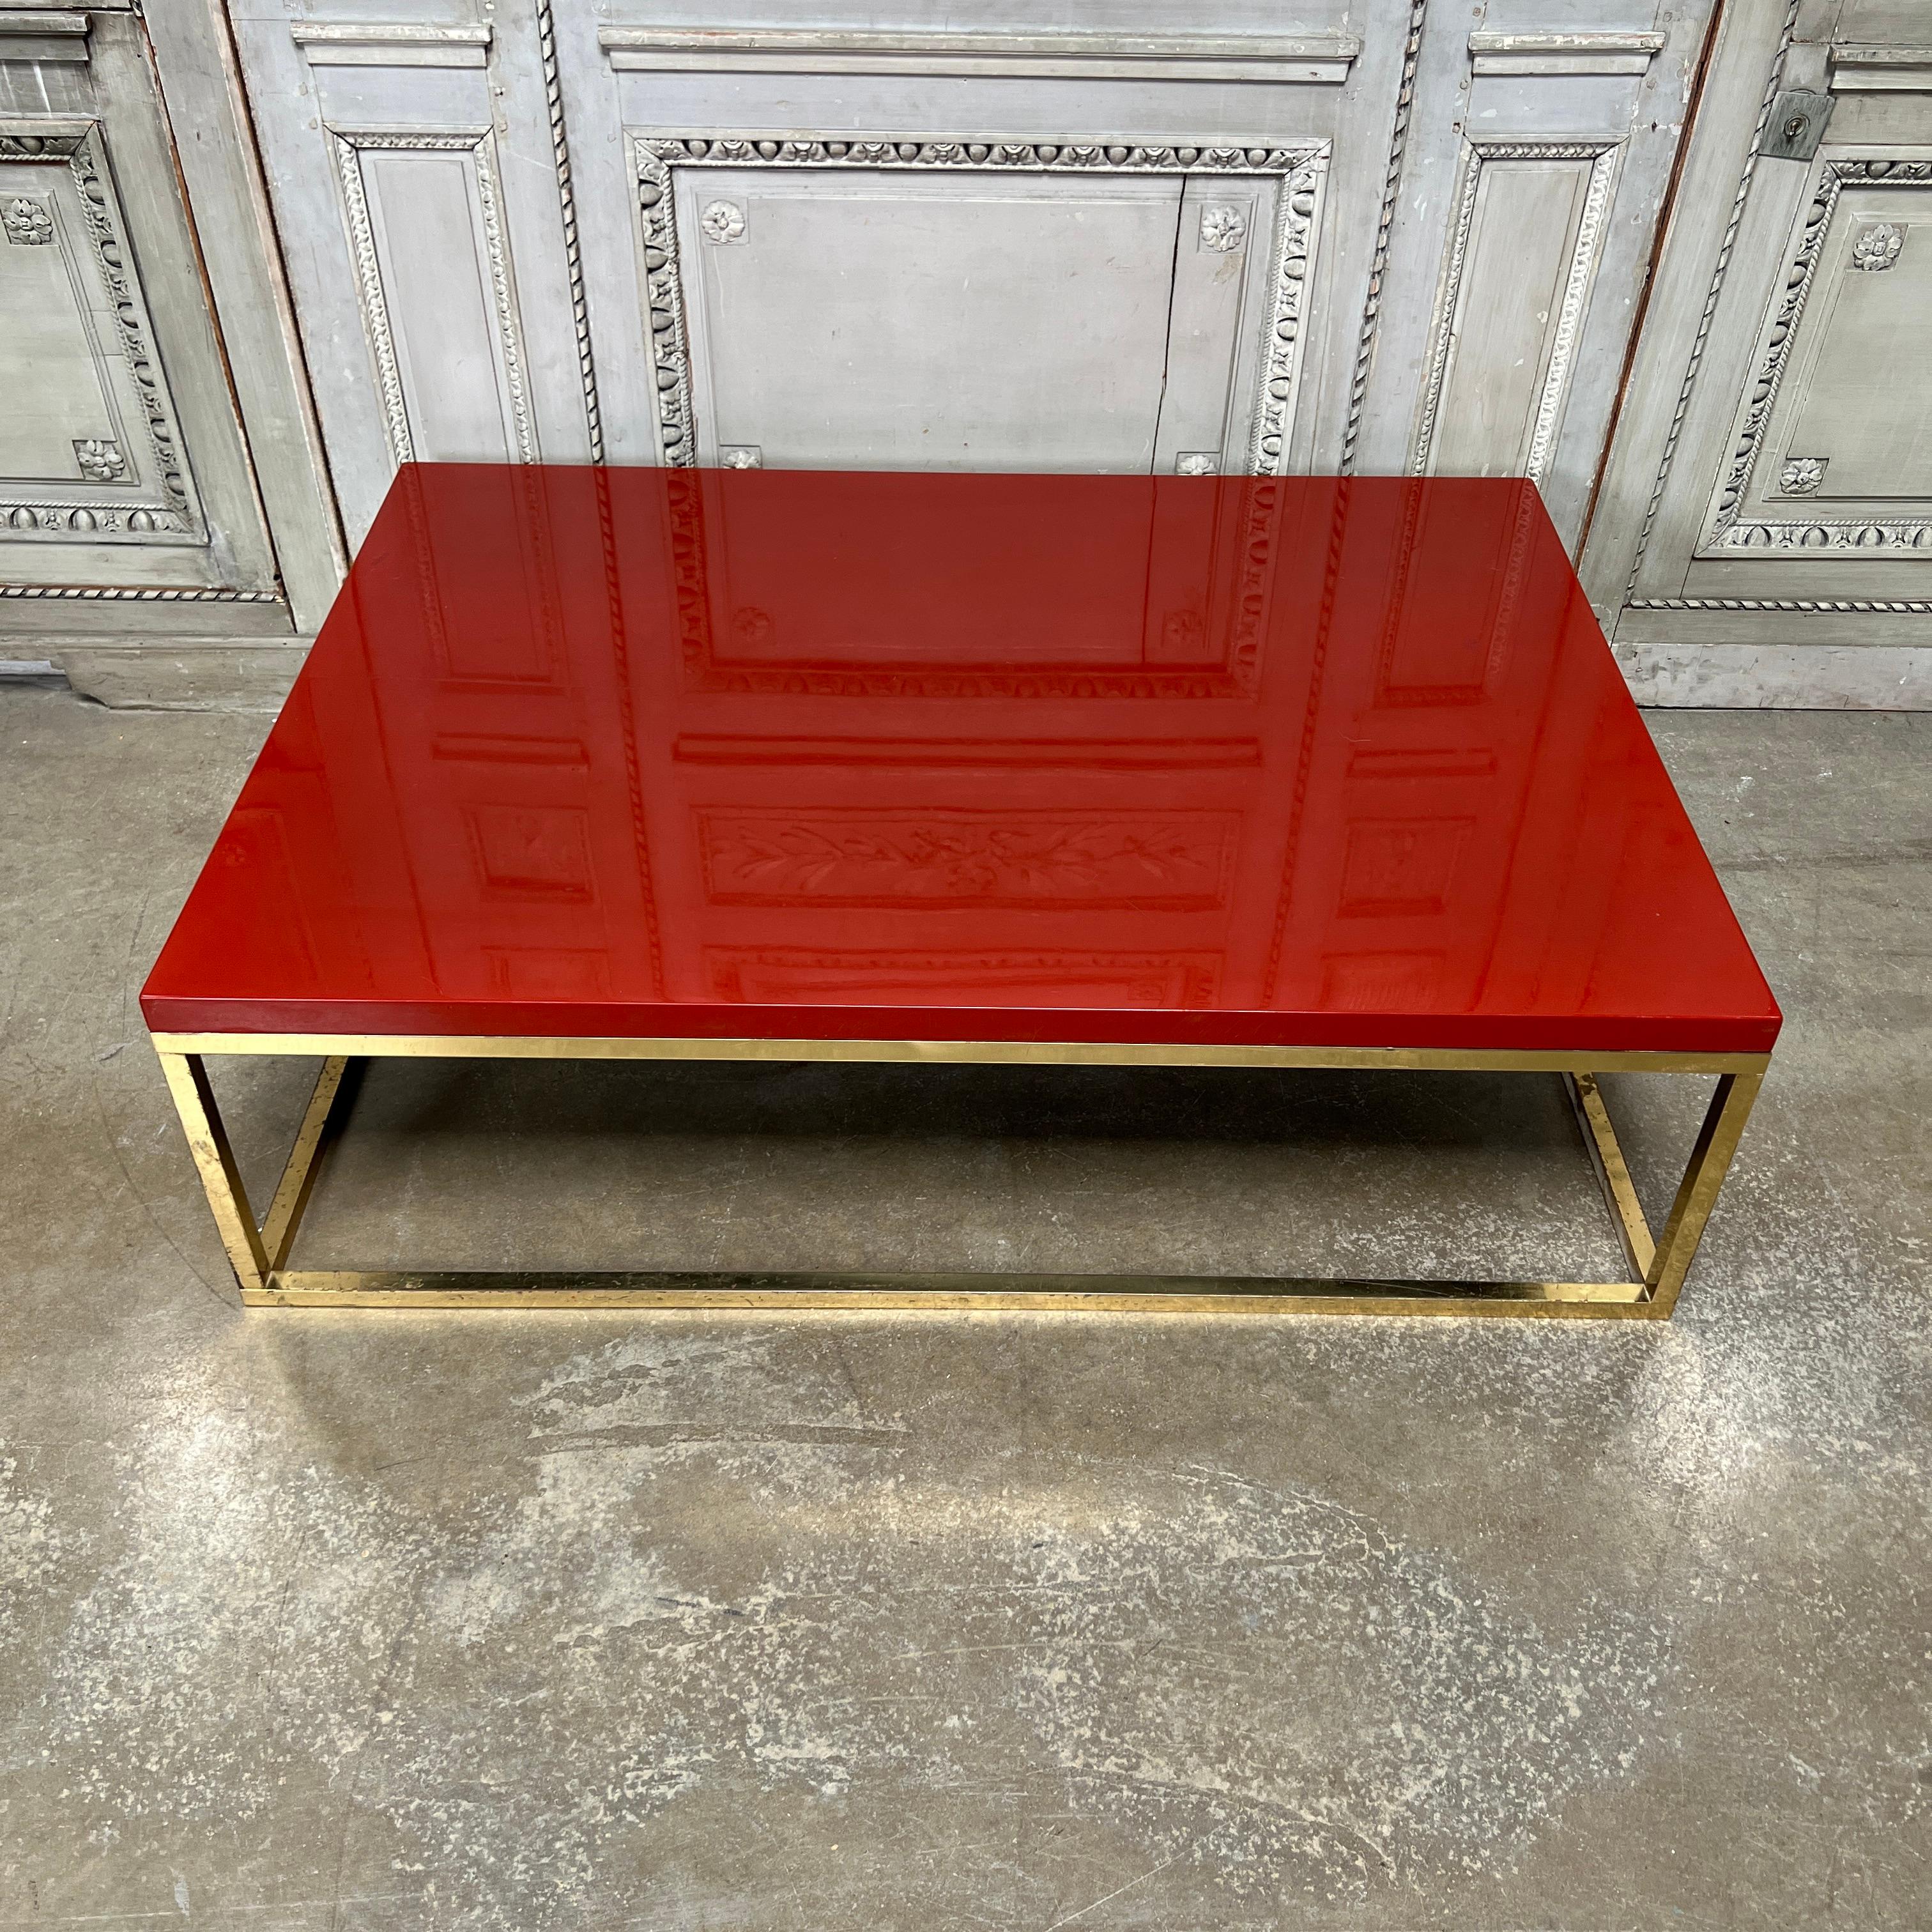 A French red lacquered and brass coffee - cocktail table. This table is a great scale and is very decorative and functional. It dates from the 1970s.